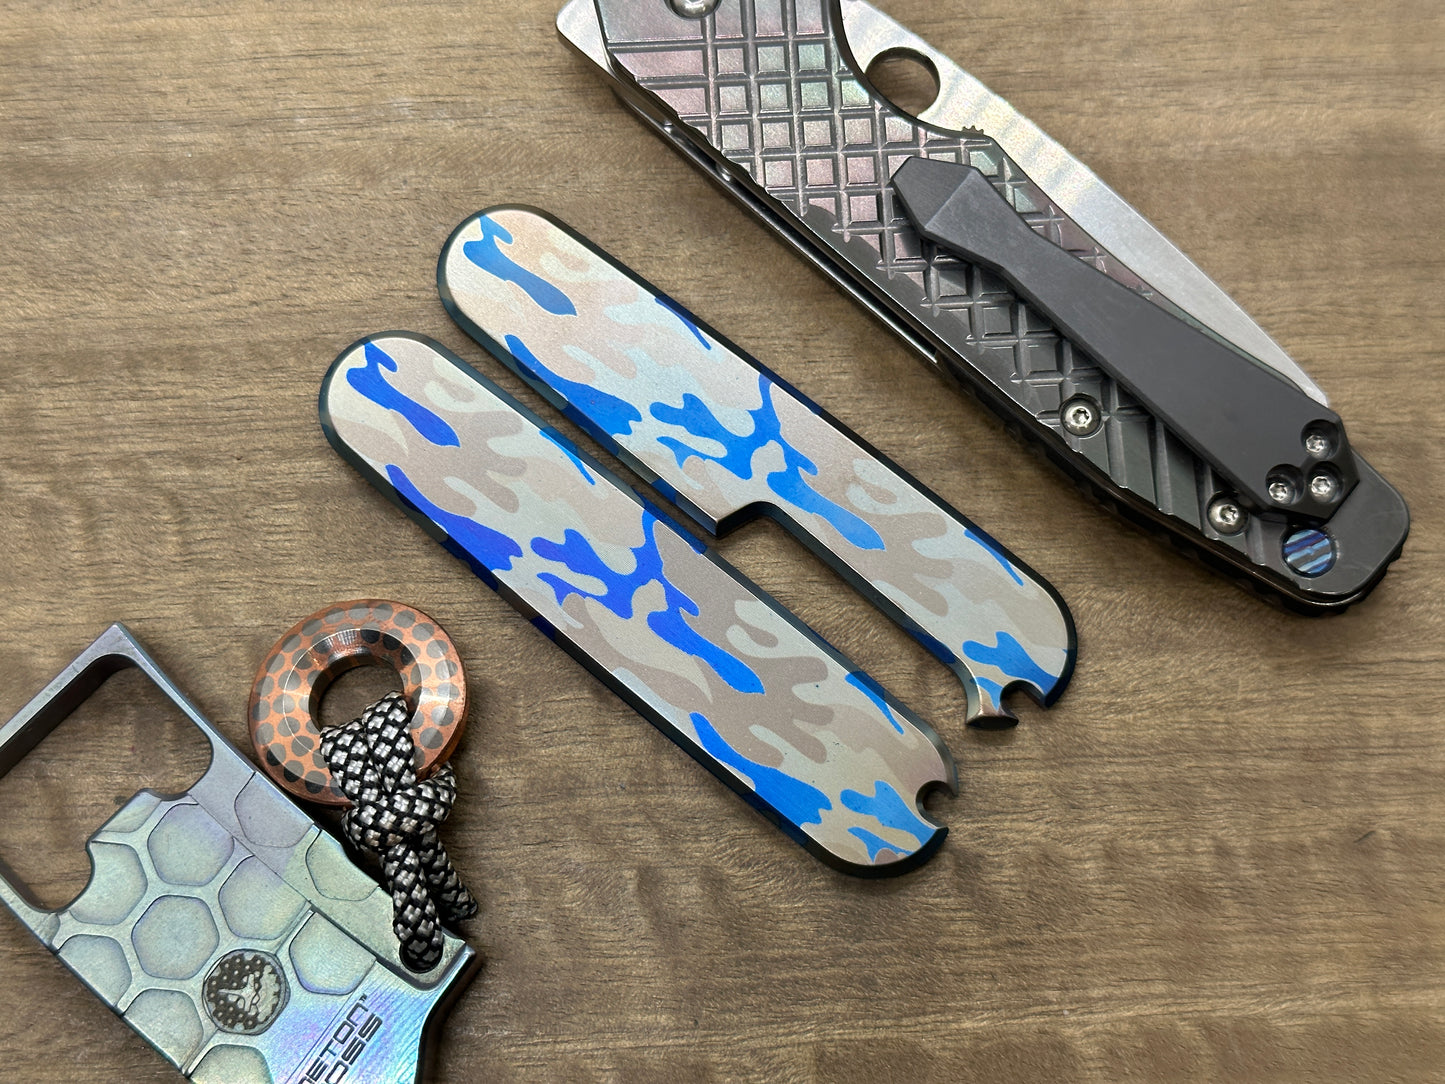 Flamed CAMO heat ano engraved 91mm Titanium Scales for Swiss Army SAK